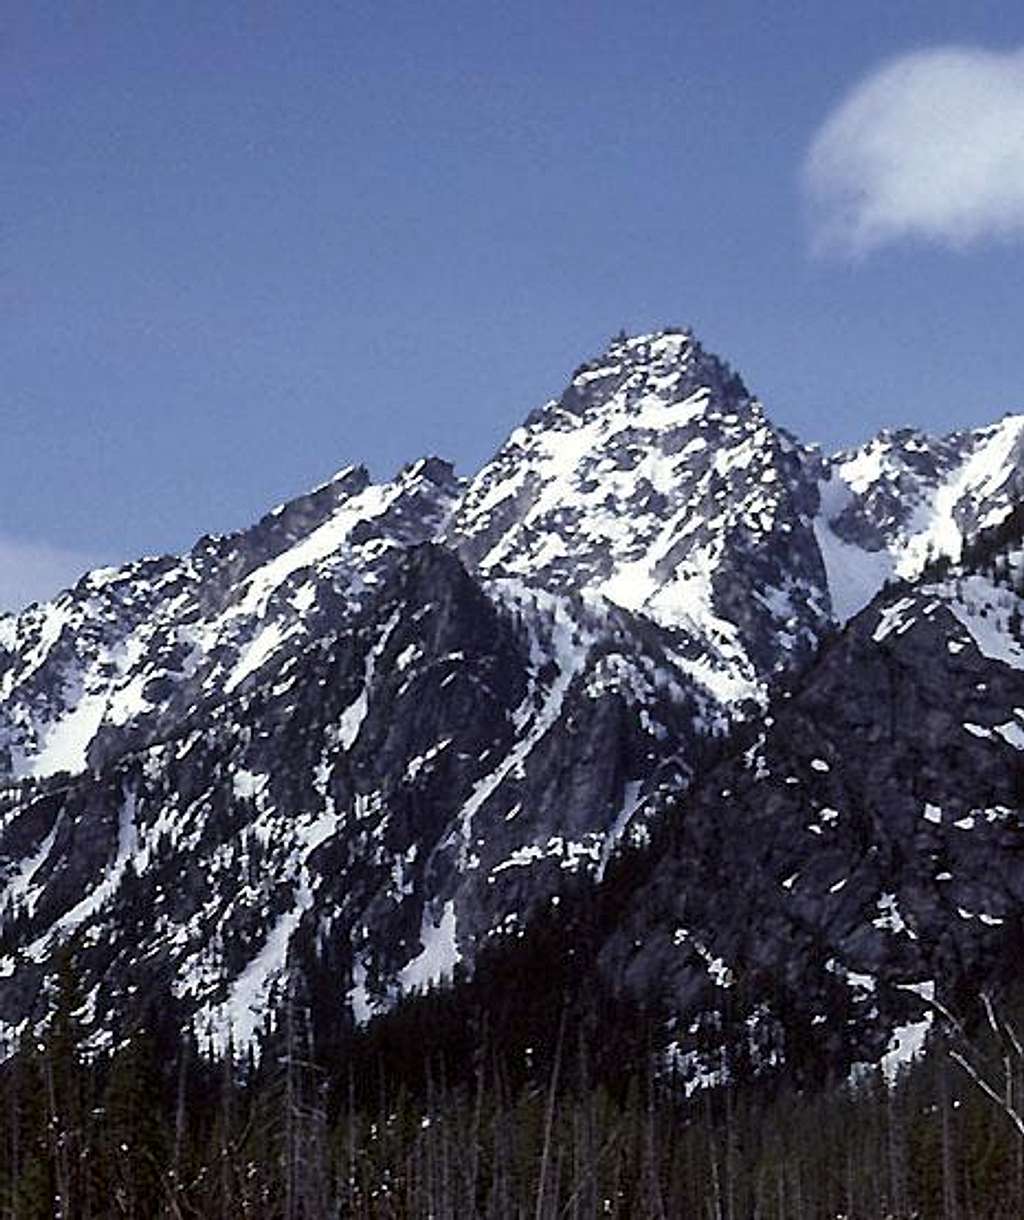 Sherpa Peak from the north.